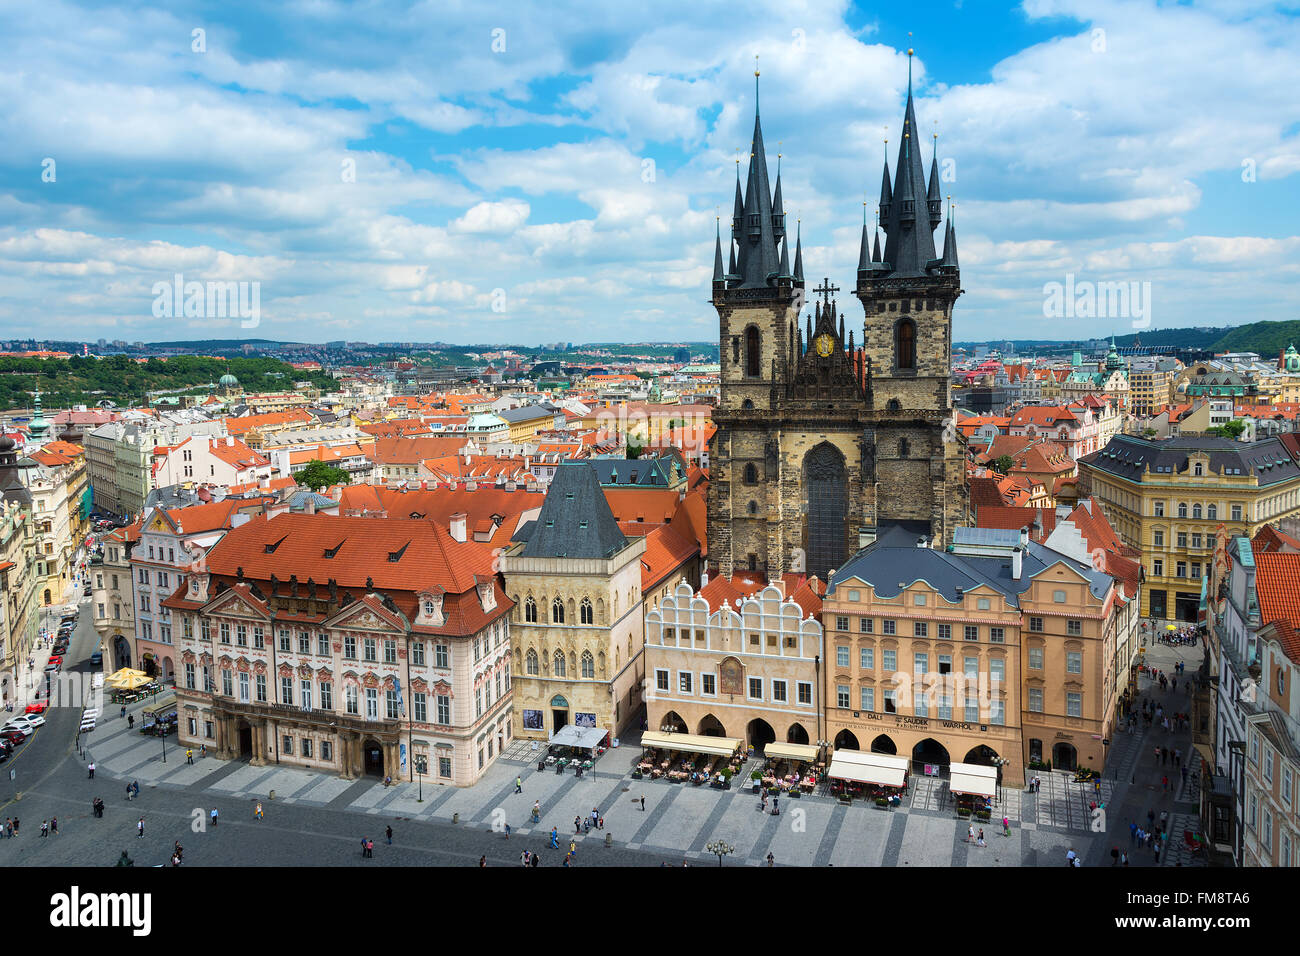 The Church of Our Lady before Tyn. The Old Town Square Prague Czech Republic. Stock Photo